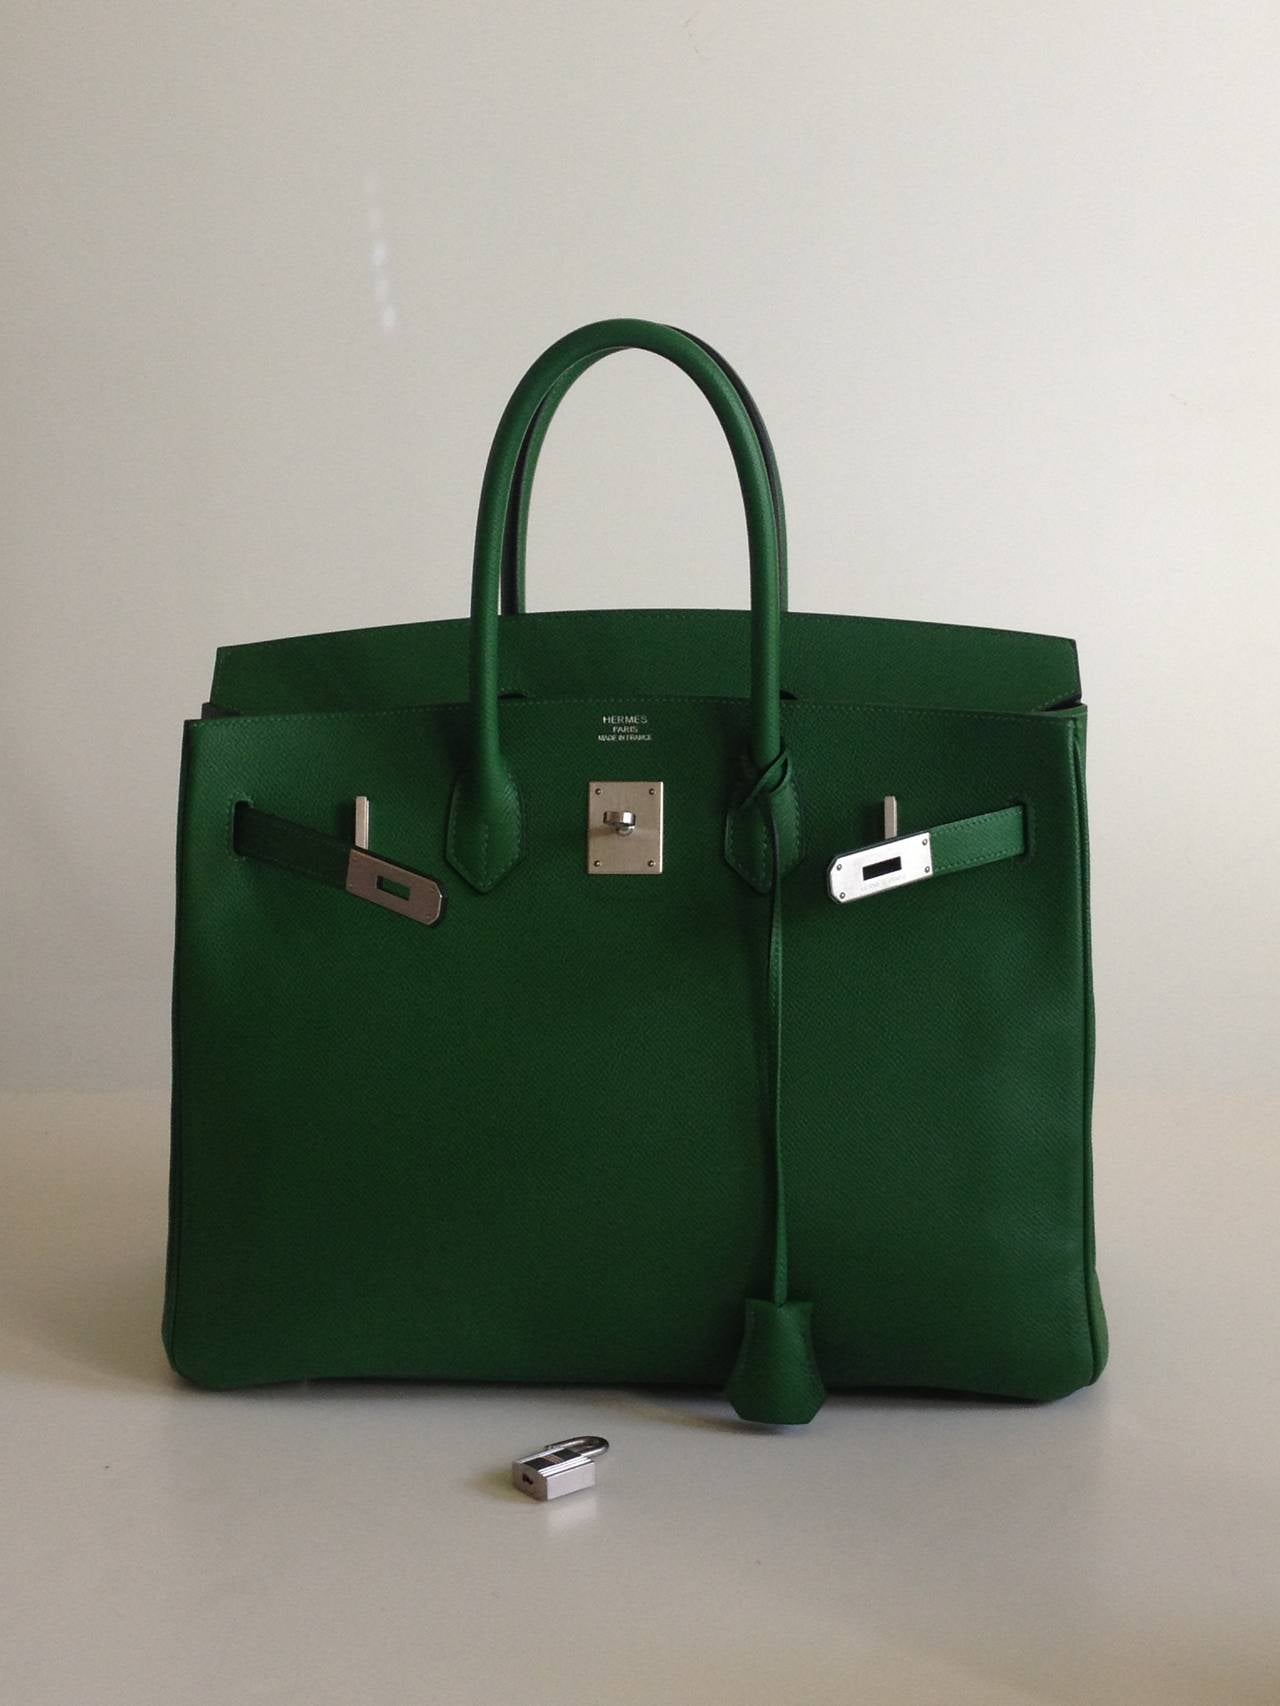 Gorgeous pebbled Clemence leather is absolutely perfect in this deep, lush, super saturated green. The Birkin is one of the most prominent symbols of elegance and luxury, and the substantial and spacious 35cm size in a deep and bold color like this